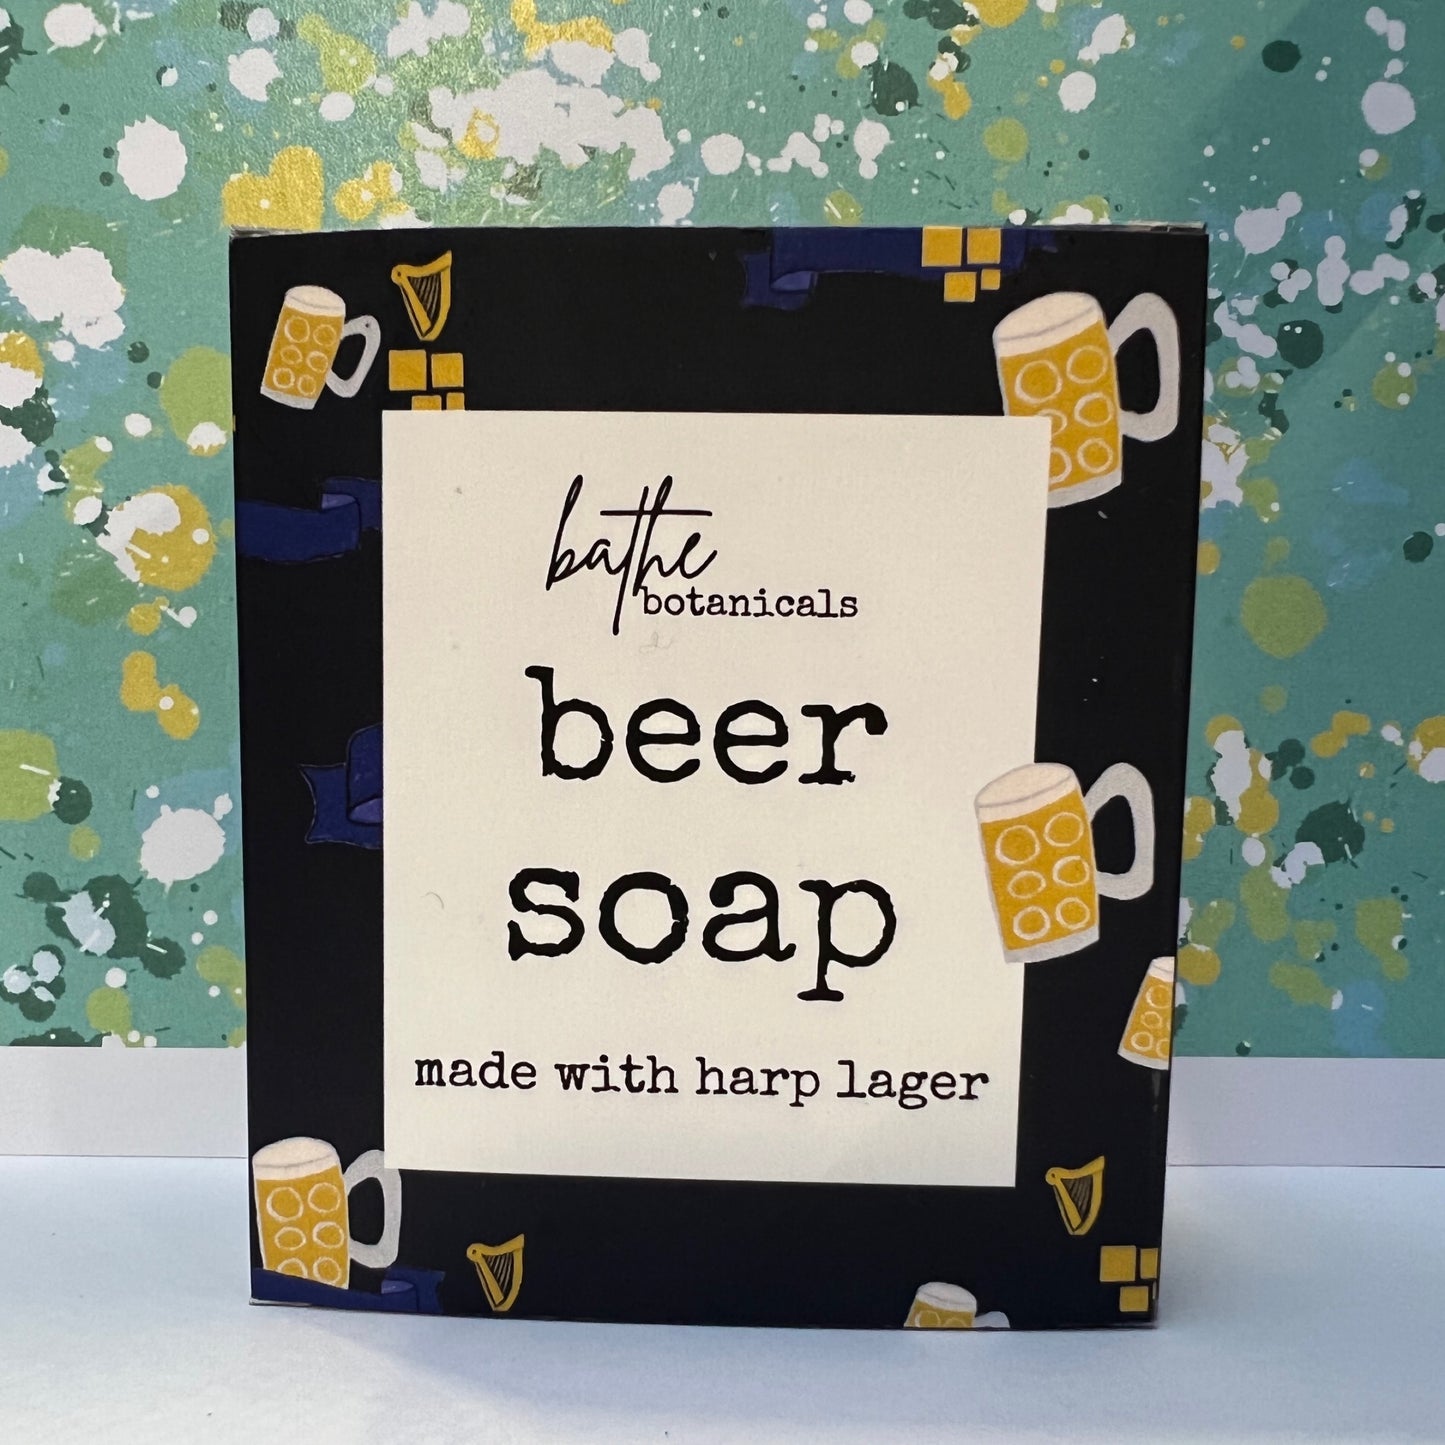 Beer soap (made with harp lager)